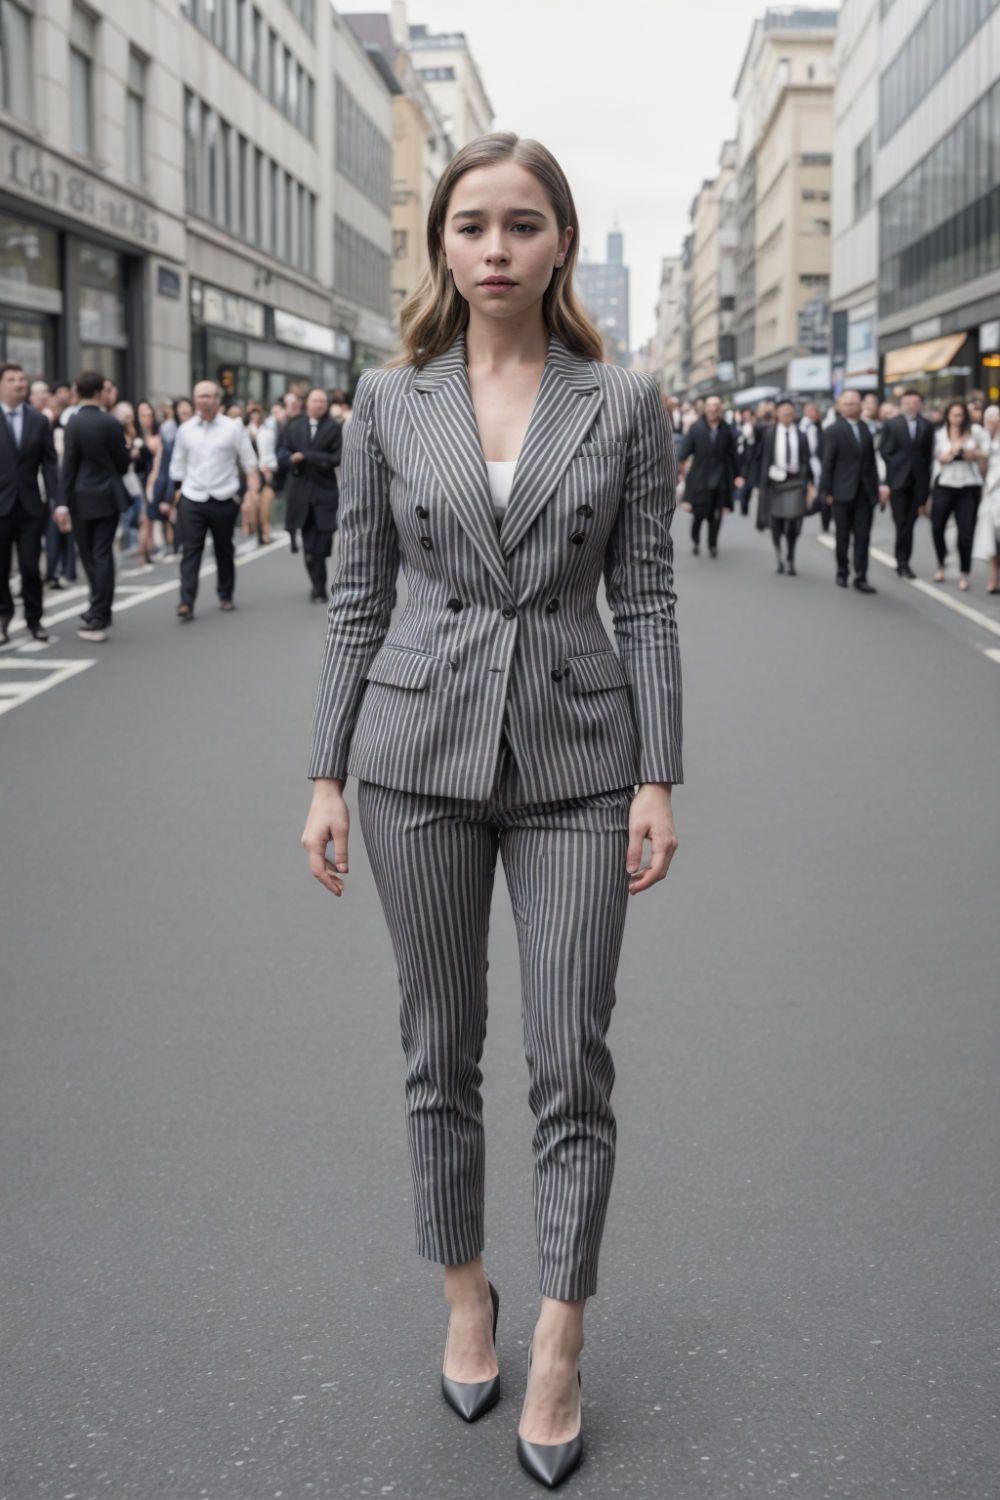 bold striped suit new years outfit